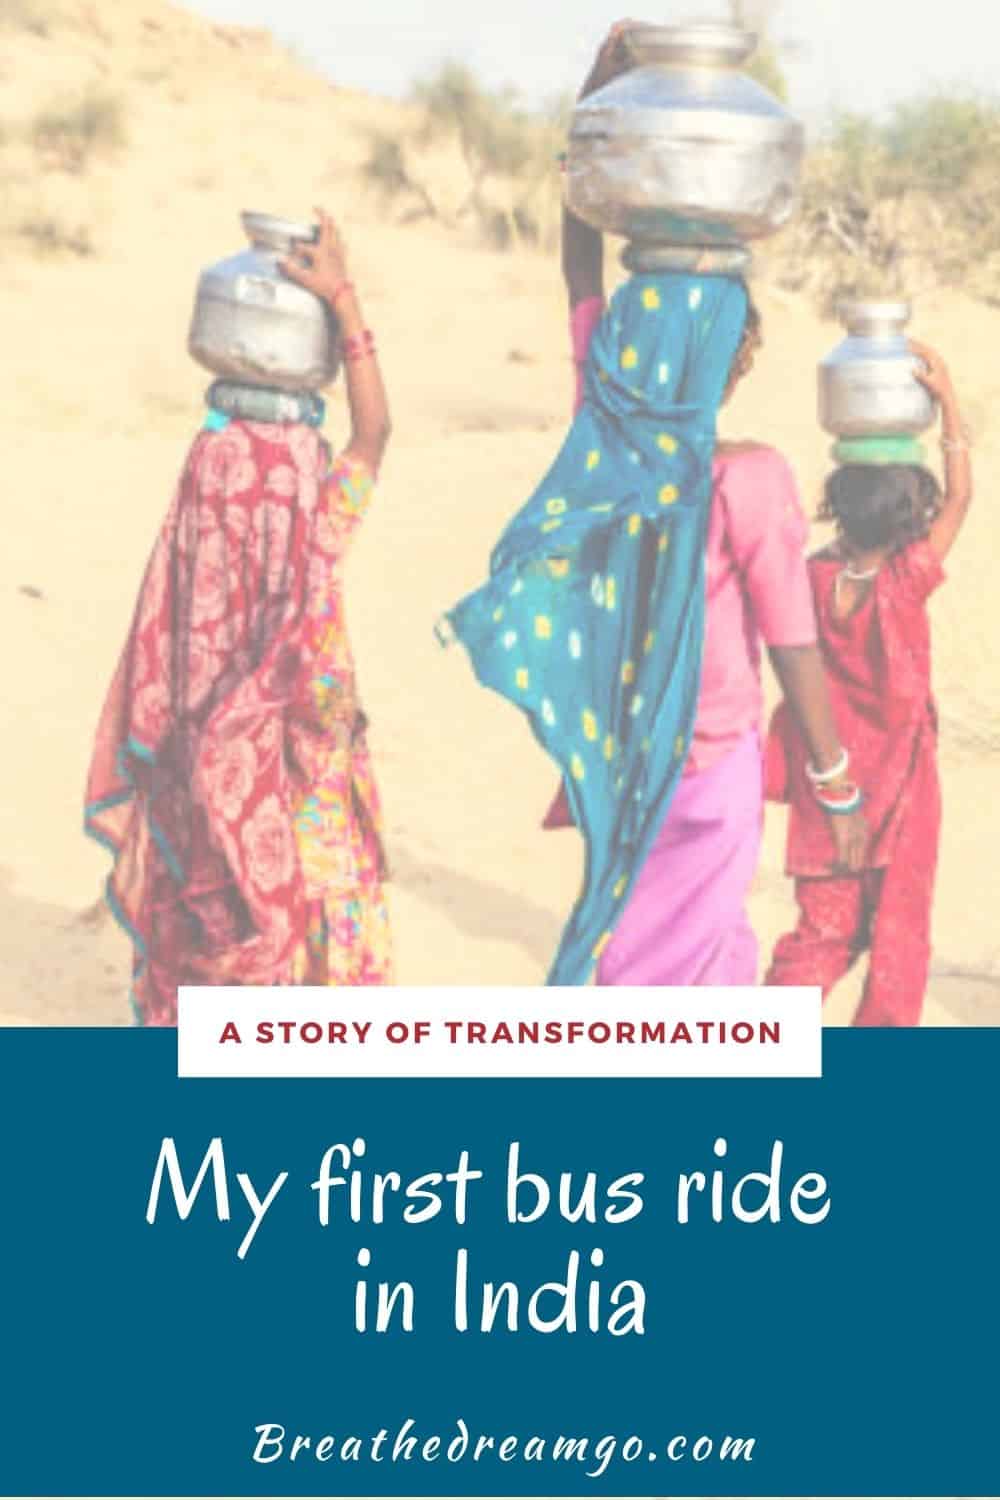 My first bus ride in India